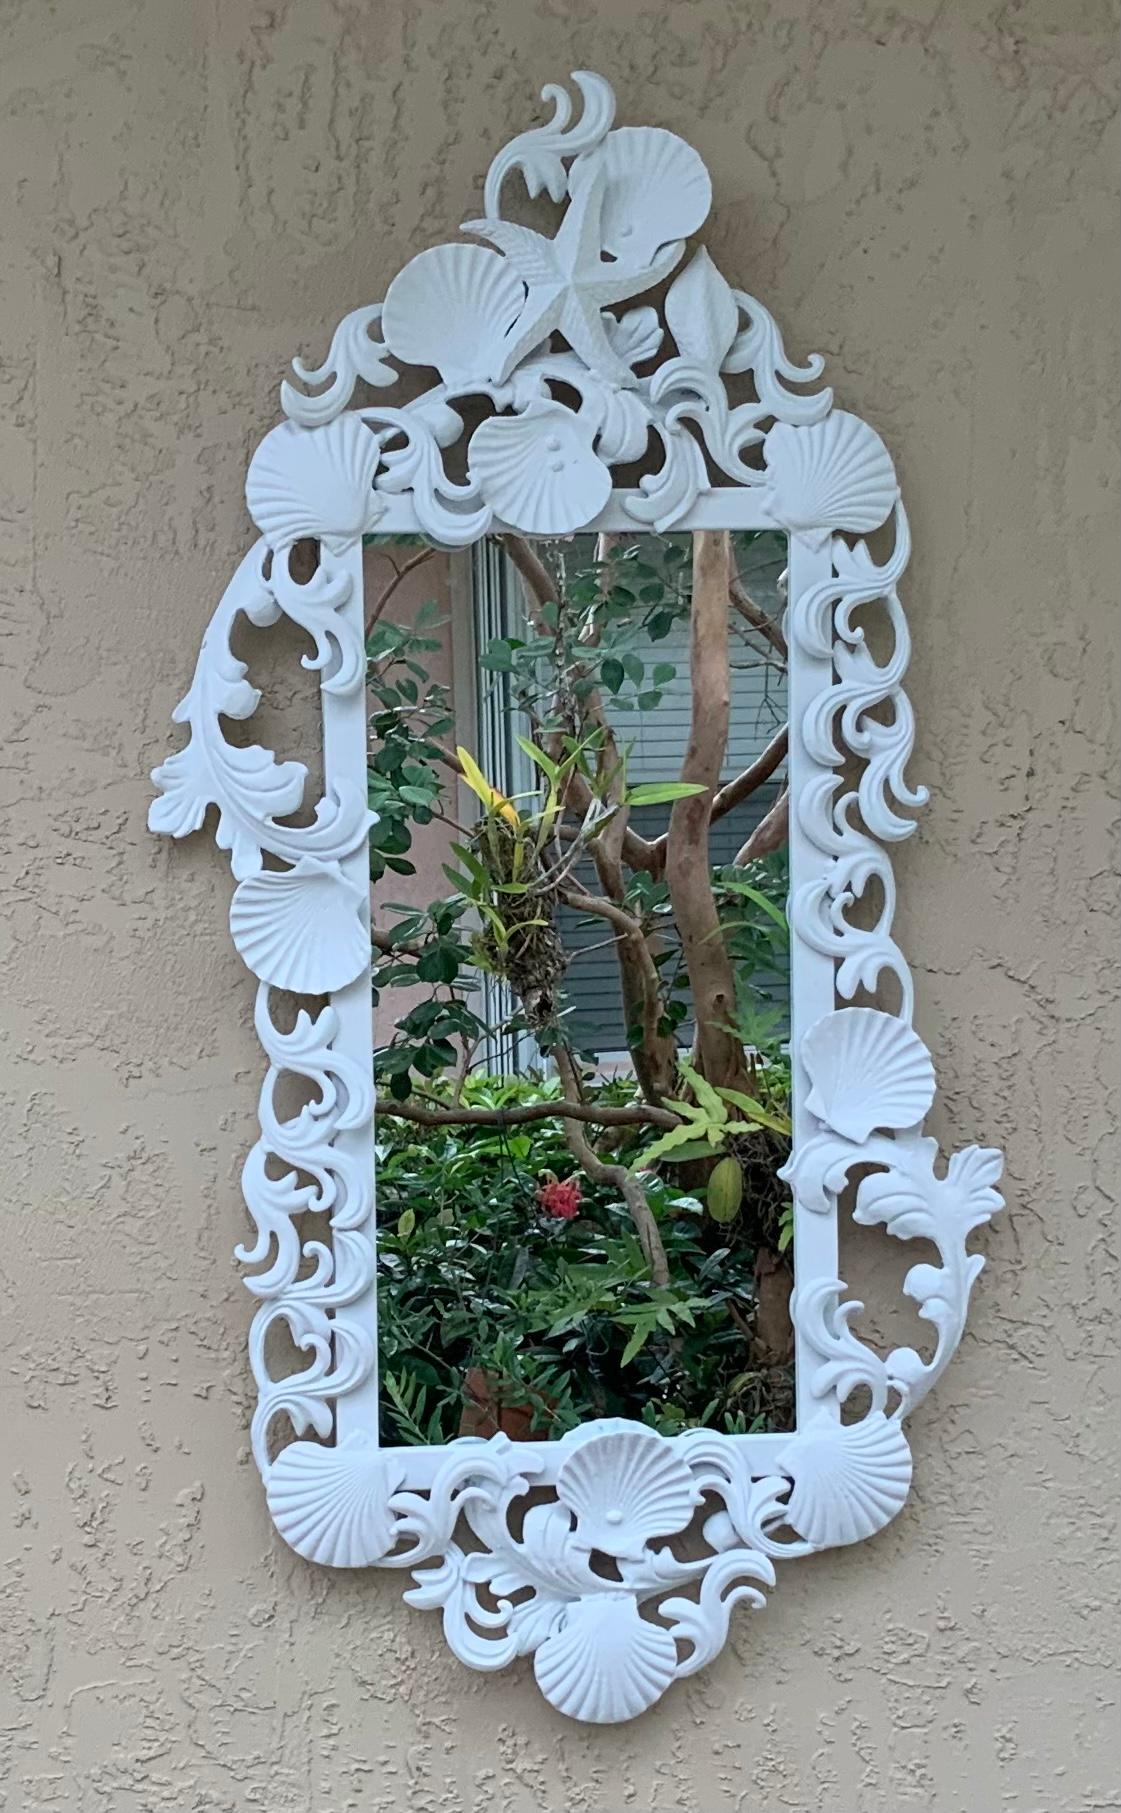 Exceptional mirror made of iron, artistically decorated with seashell and sea star motifs, painted with flat white oil painting color.
Actual mirror size: 22”.5 x 10”25.